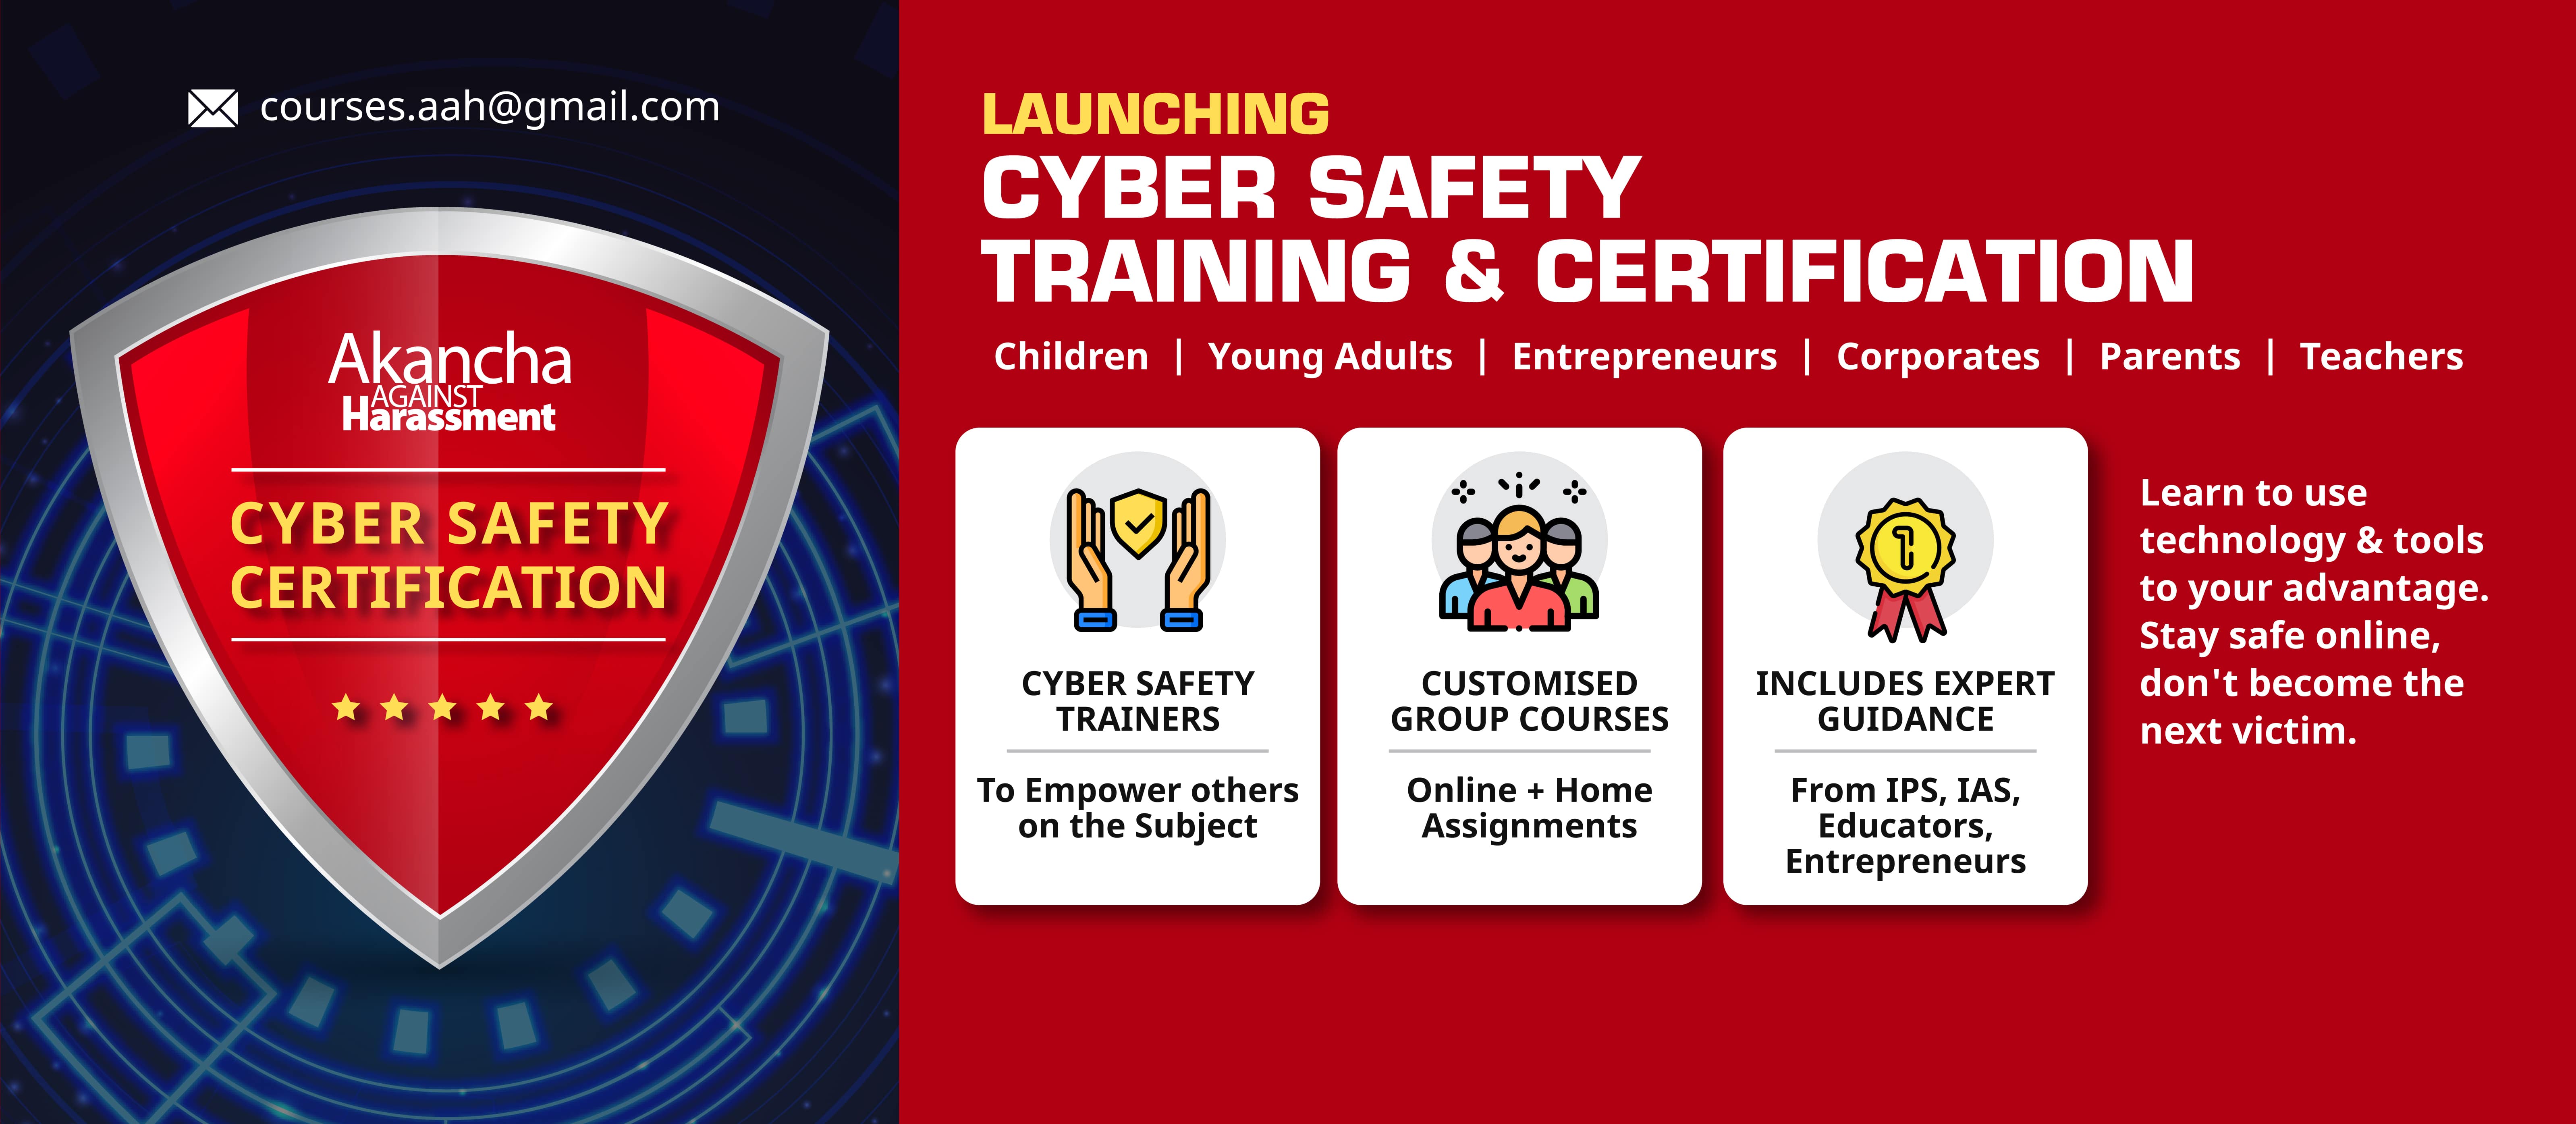 Launching cyber safety training & certification